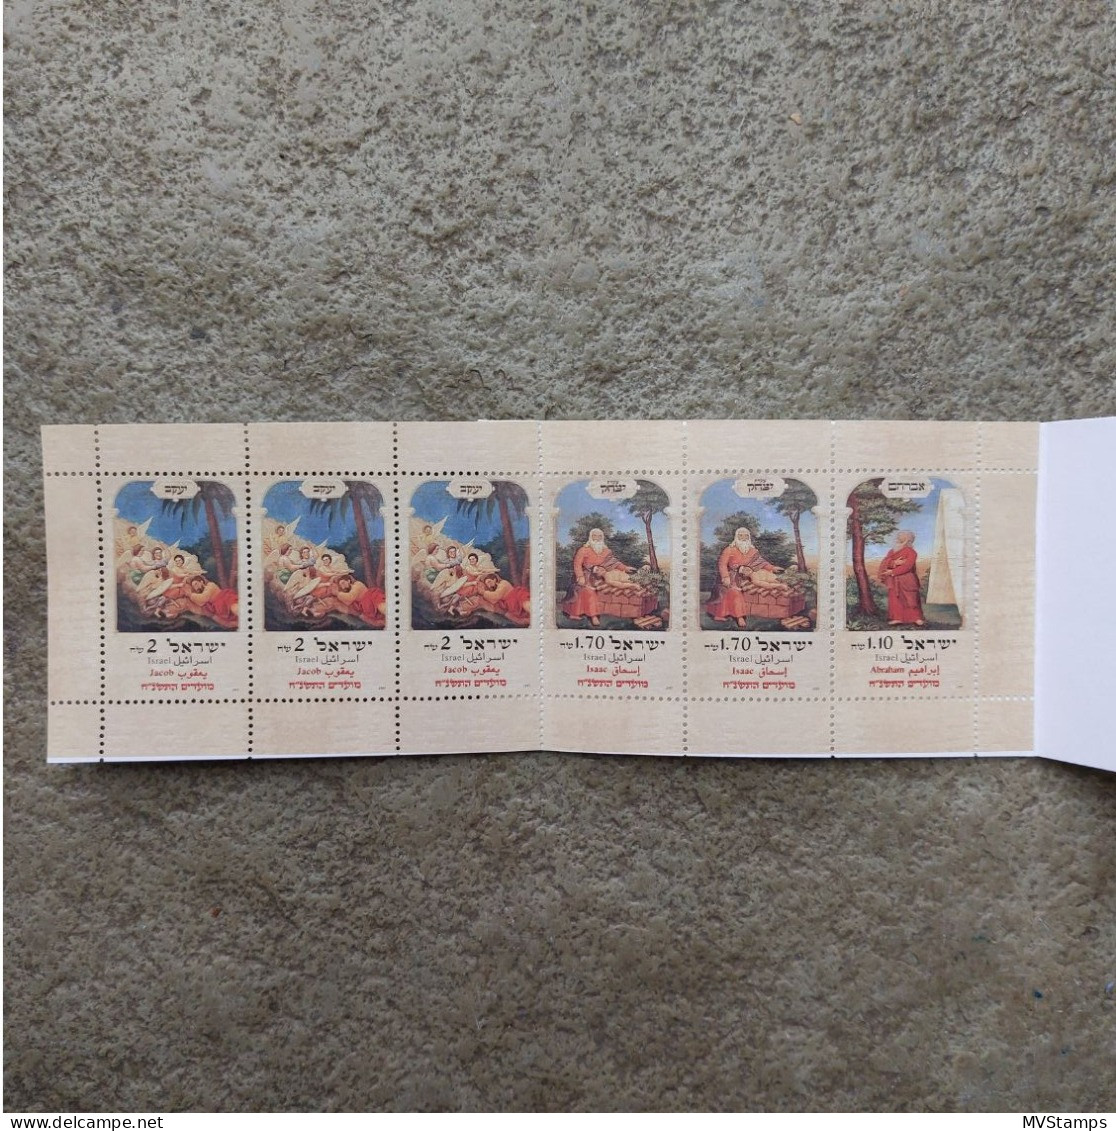 Israel 1997 Booklet Festival Stamps (Michel MH 31) Nice MNH - Libretti